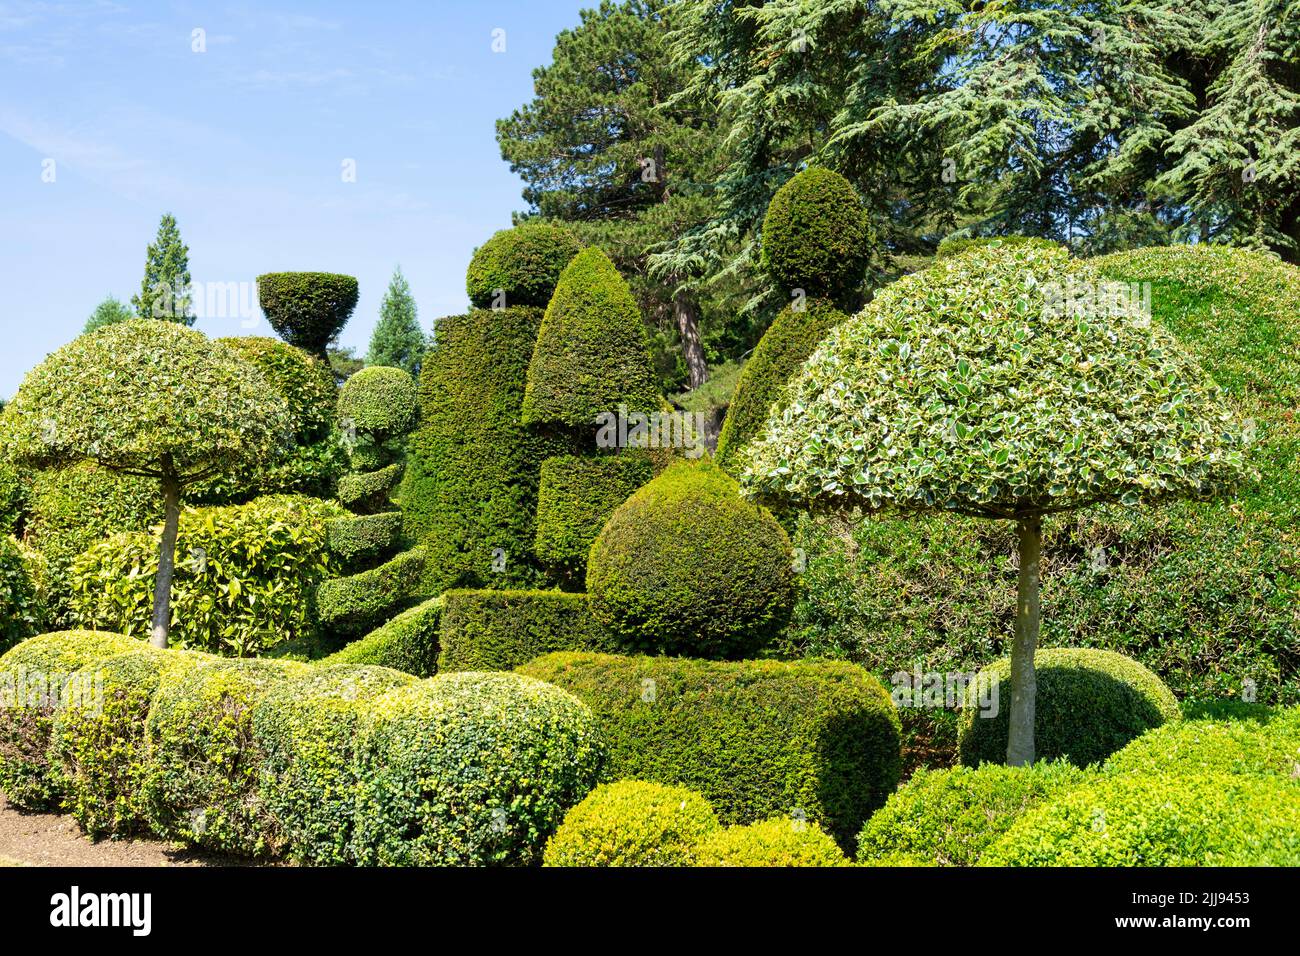 Yew and box Topiary Garden at Brodsworth Hall and Gardens near Doncaster South Yorkshire England UK GB Europe Stock Photo